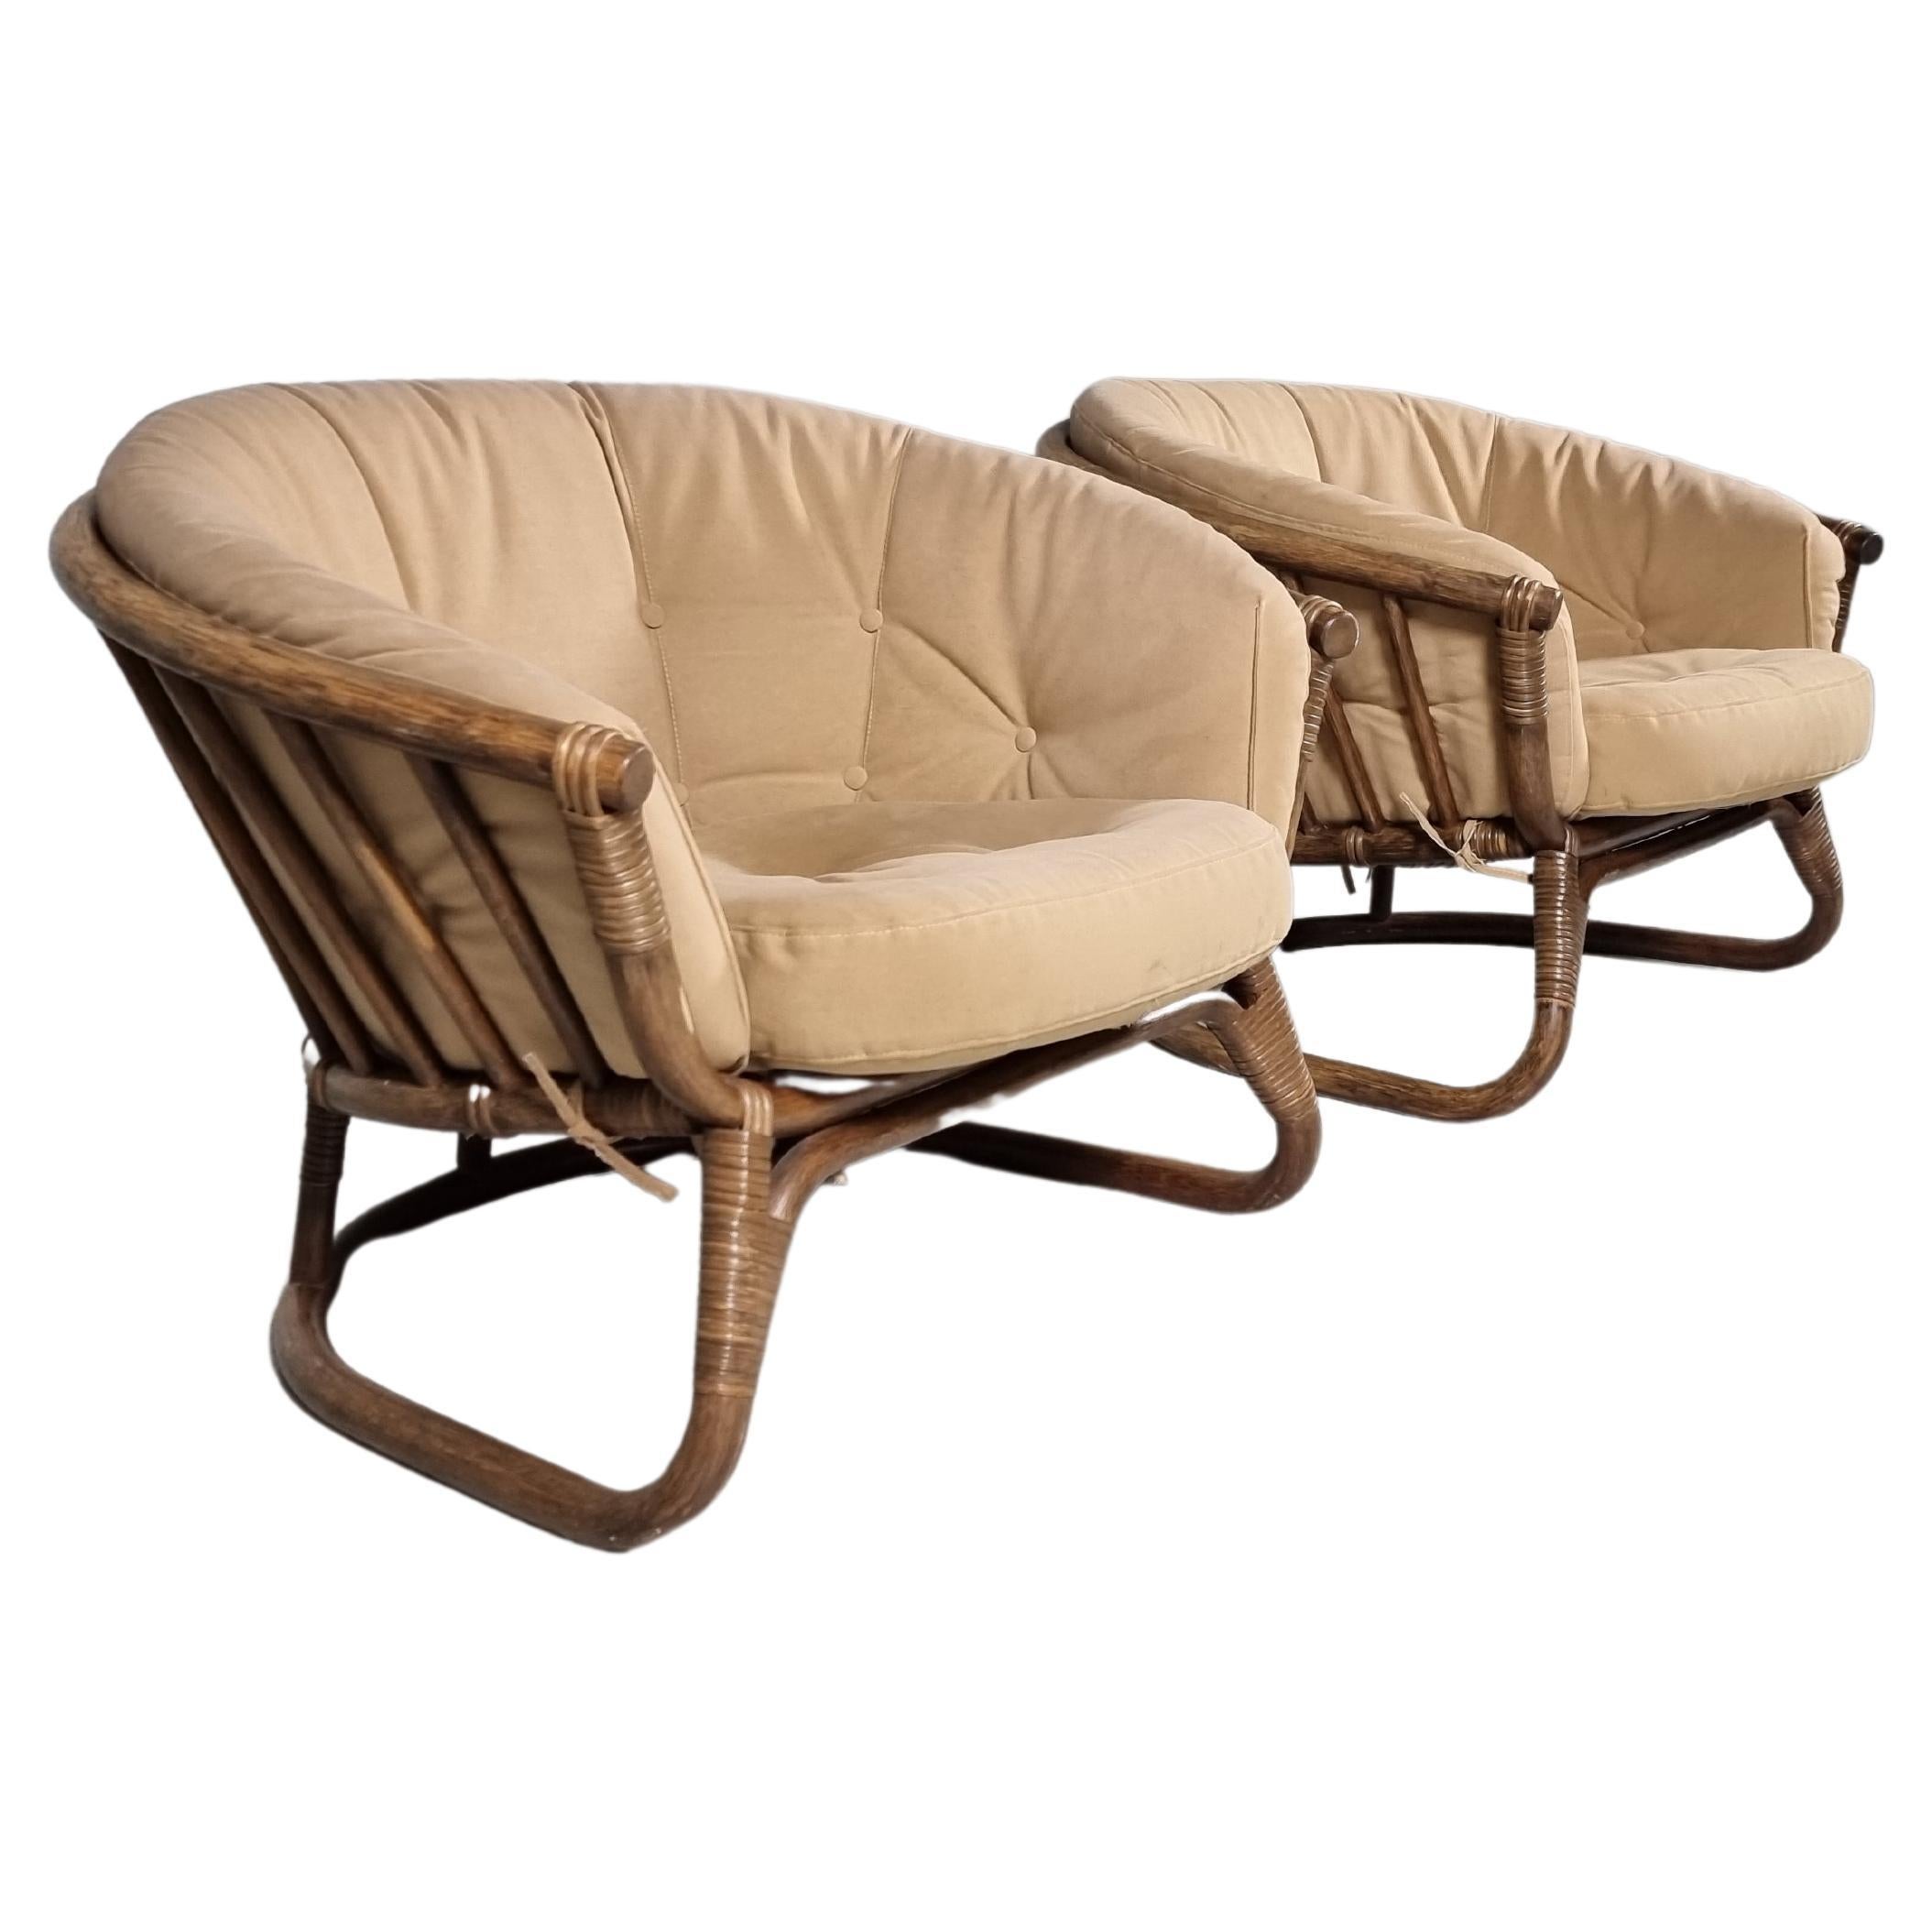 Bentwood Patio / Garden Lounge Chairs, France, 1970s